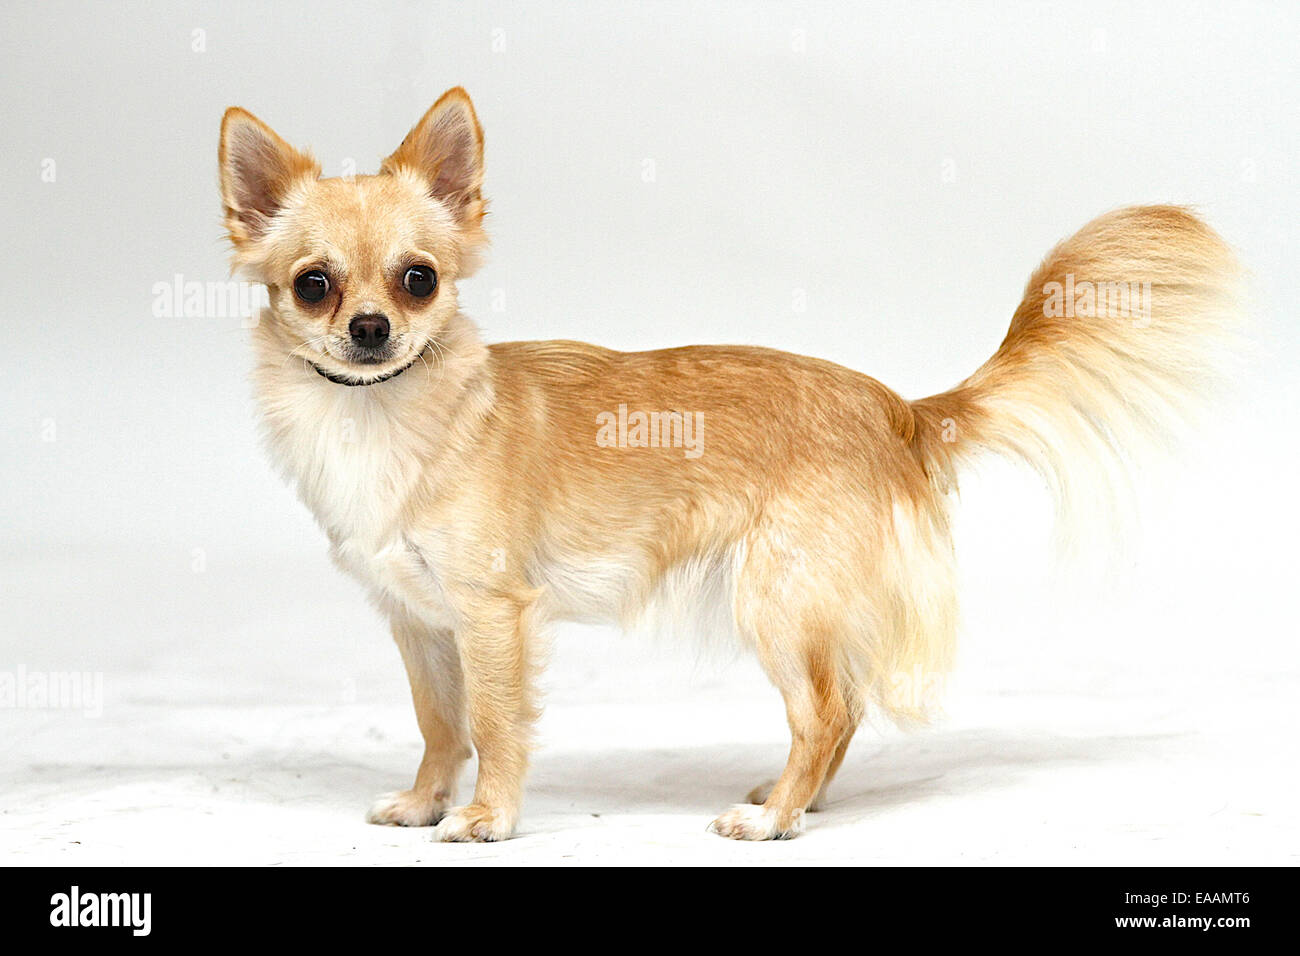 Long haired Chihuahua on white background Stock Photo